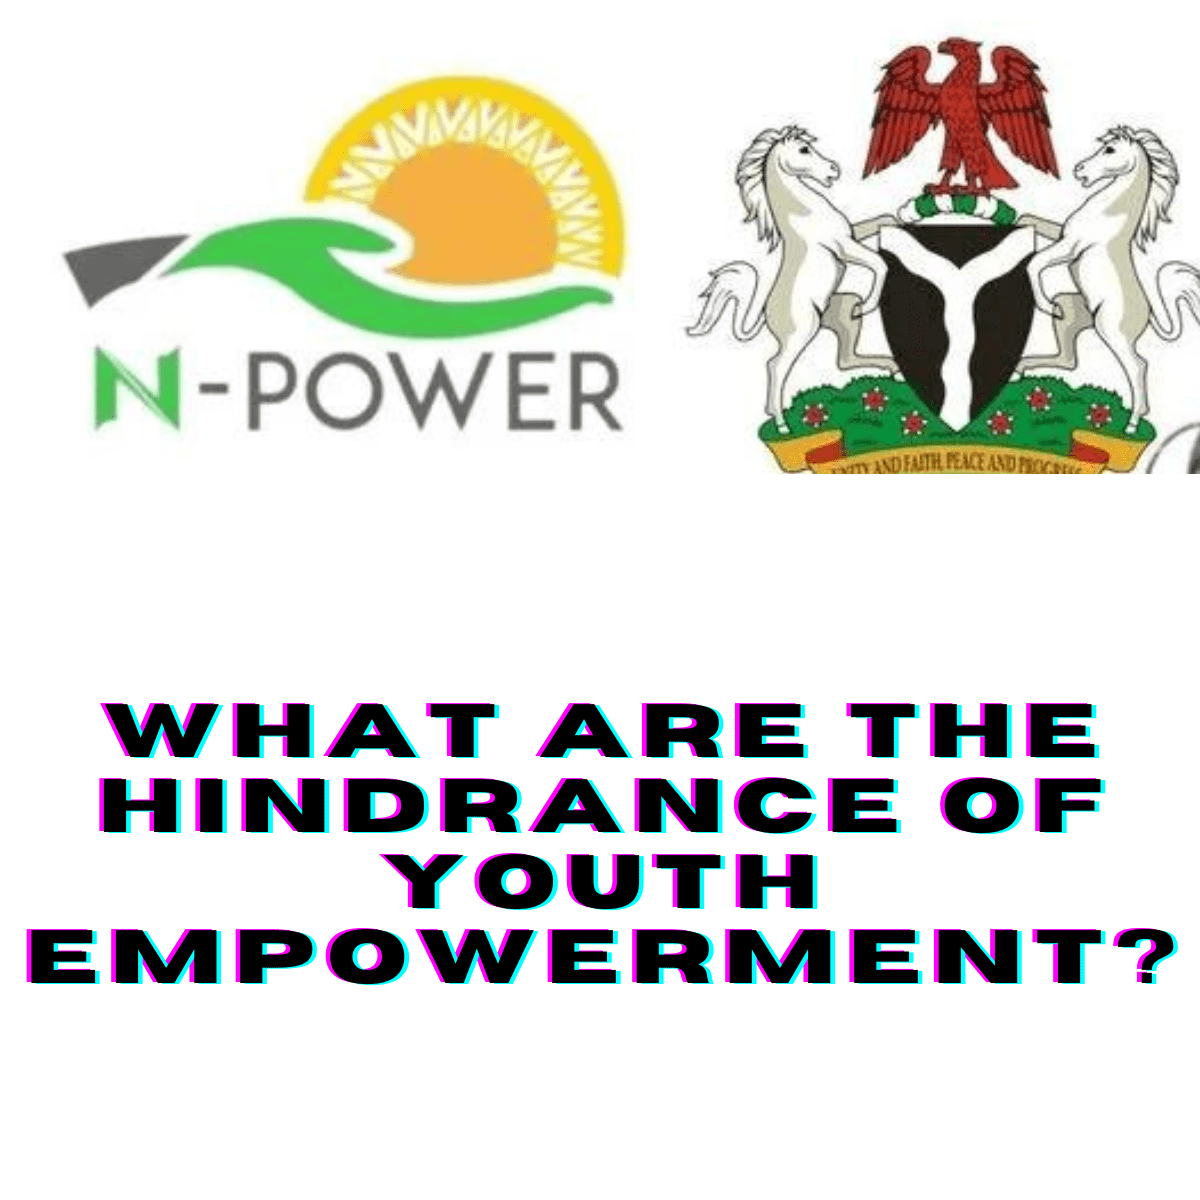 What Are The Hindrance Of Youth Empowerment